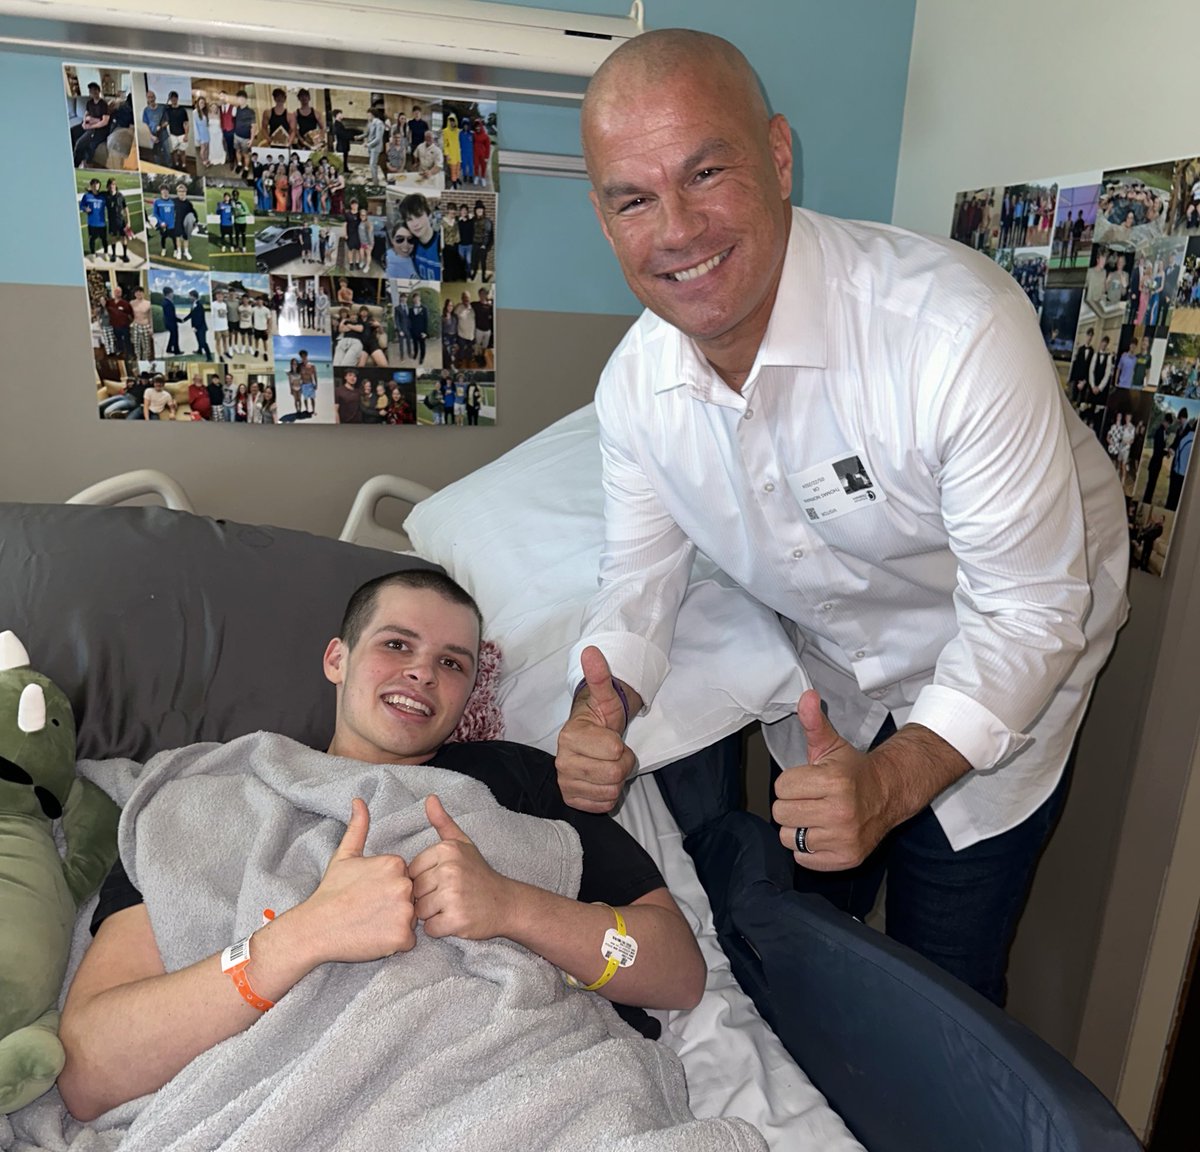 On the morning of May 5th, 17-year-old Carter from Texarkana,Texas was traveling with friends to the lake when the vehicle he was in hydroplaned resulting in Carter sustaining a traumatic brain injury. Today I had the opportunity to meet Carter. We had a great visit and as I was